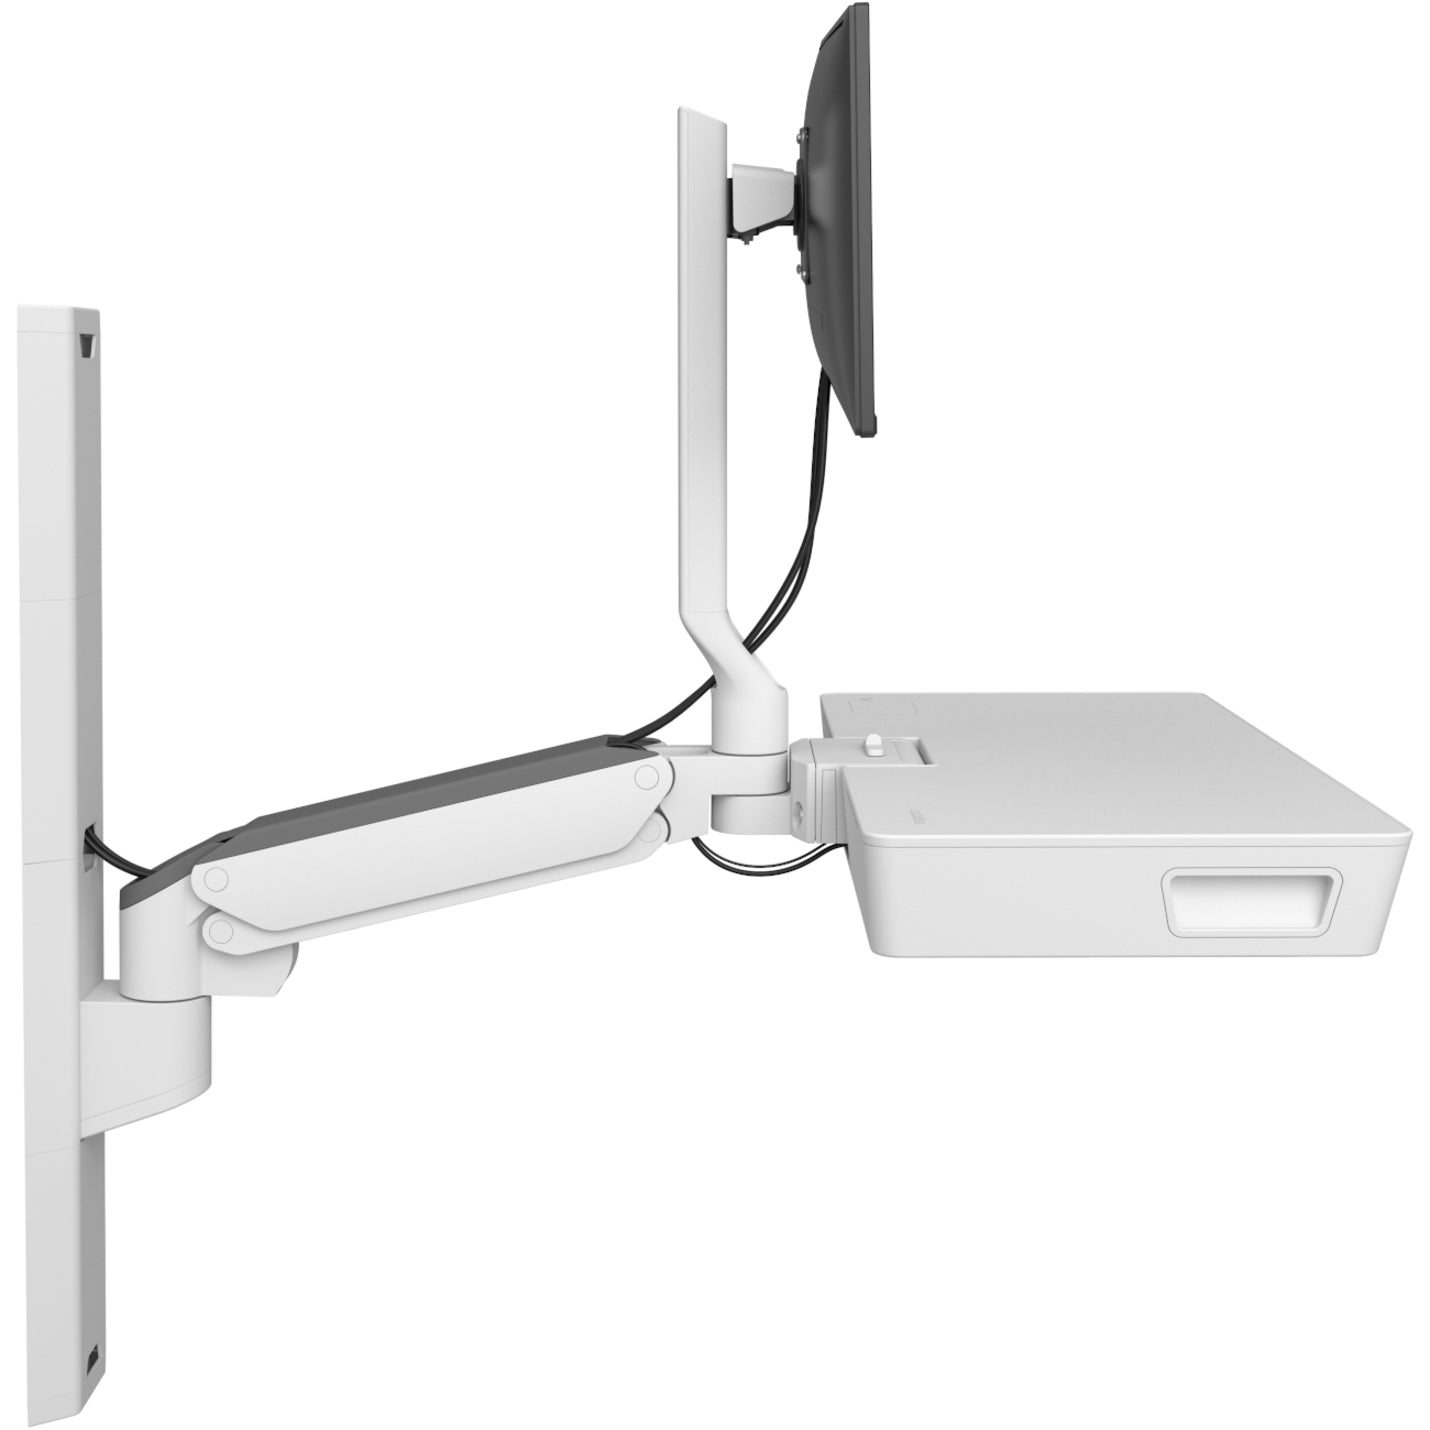 Ergotron 45-619-251 CareFit Mounting Arm for Monitor, Mouse, Keyboard, LCD Display, Mount Extension - White